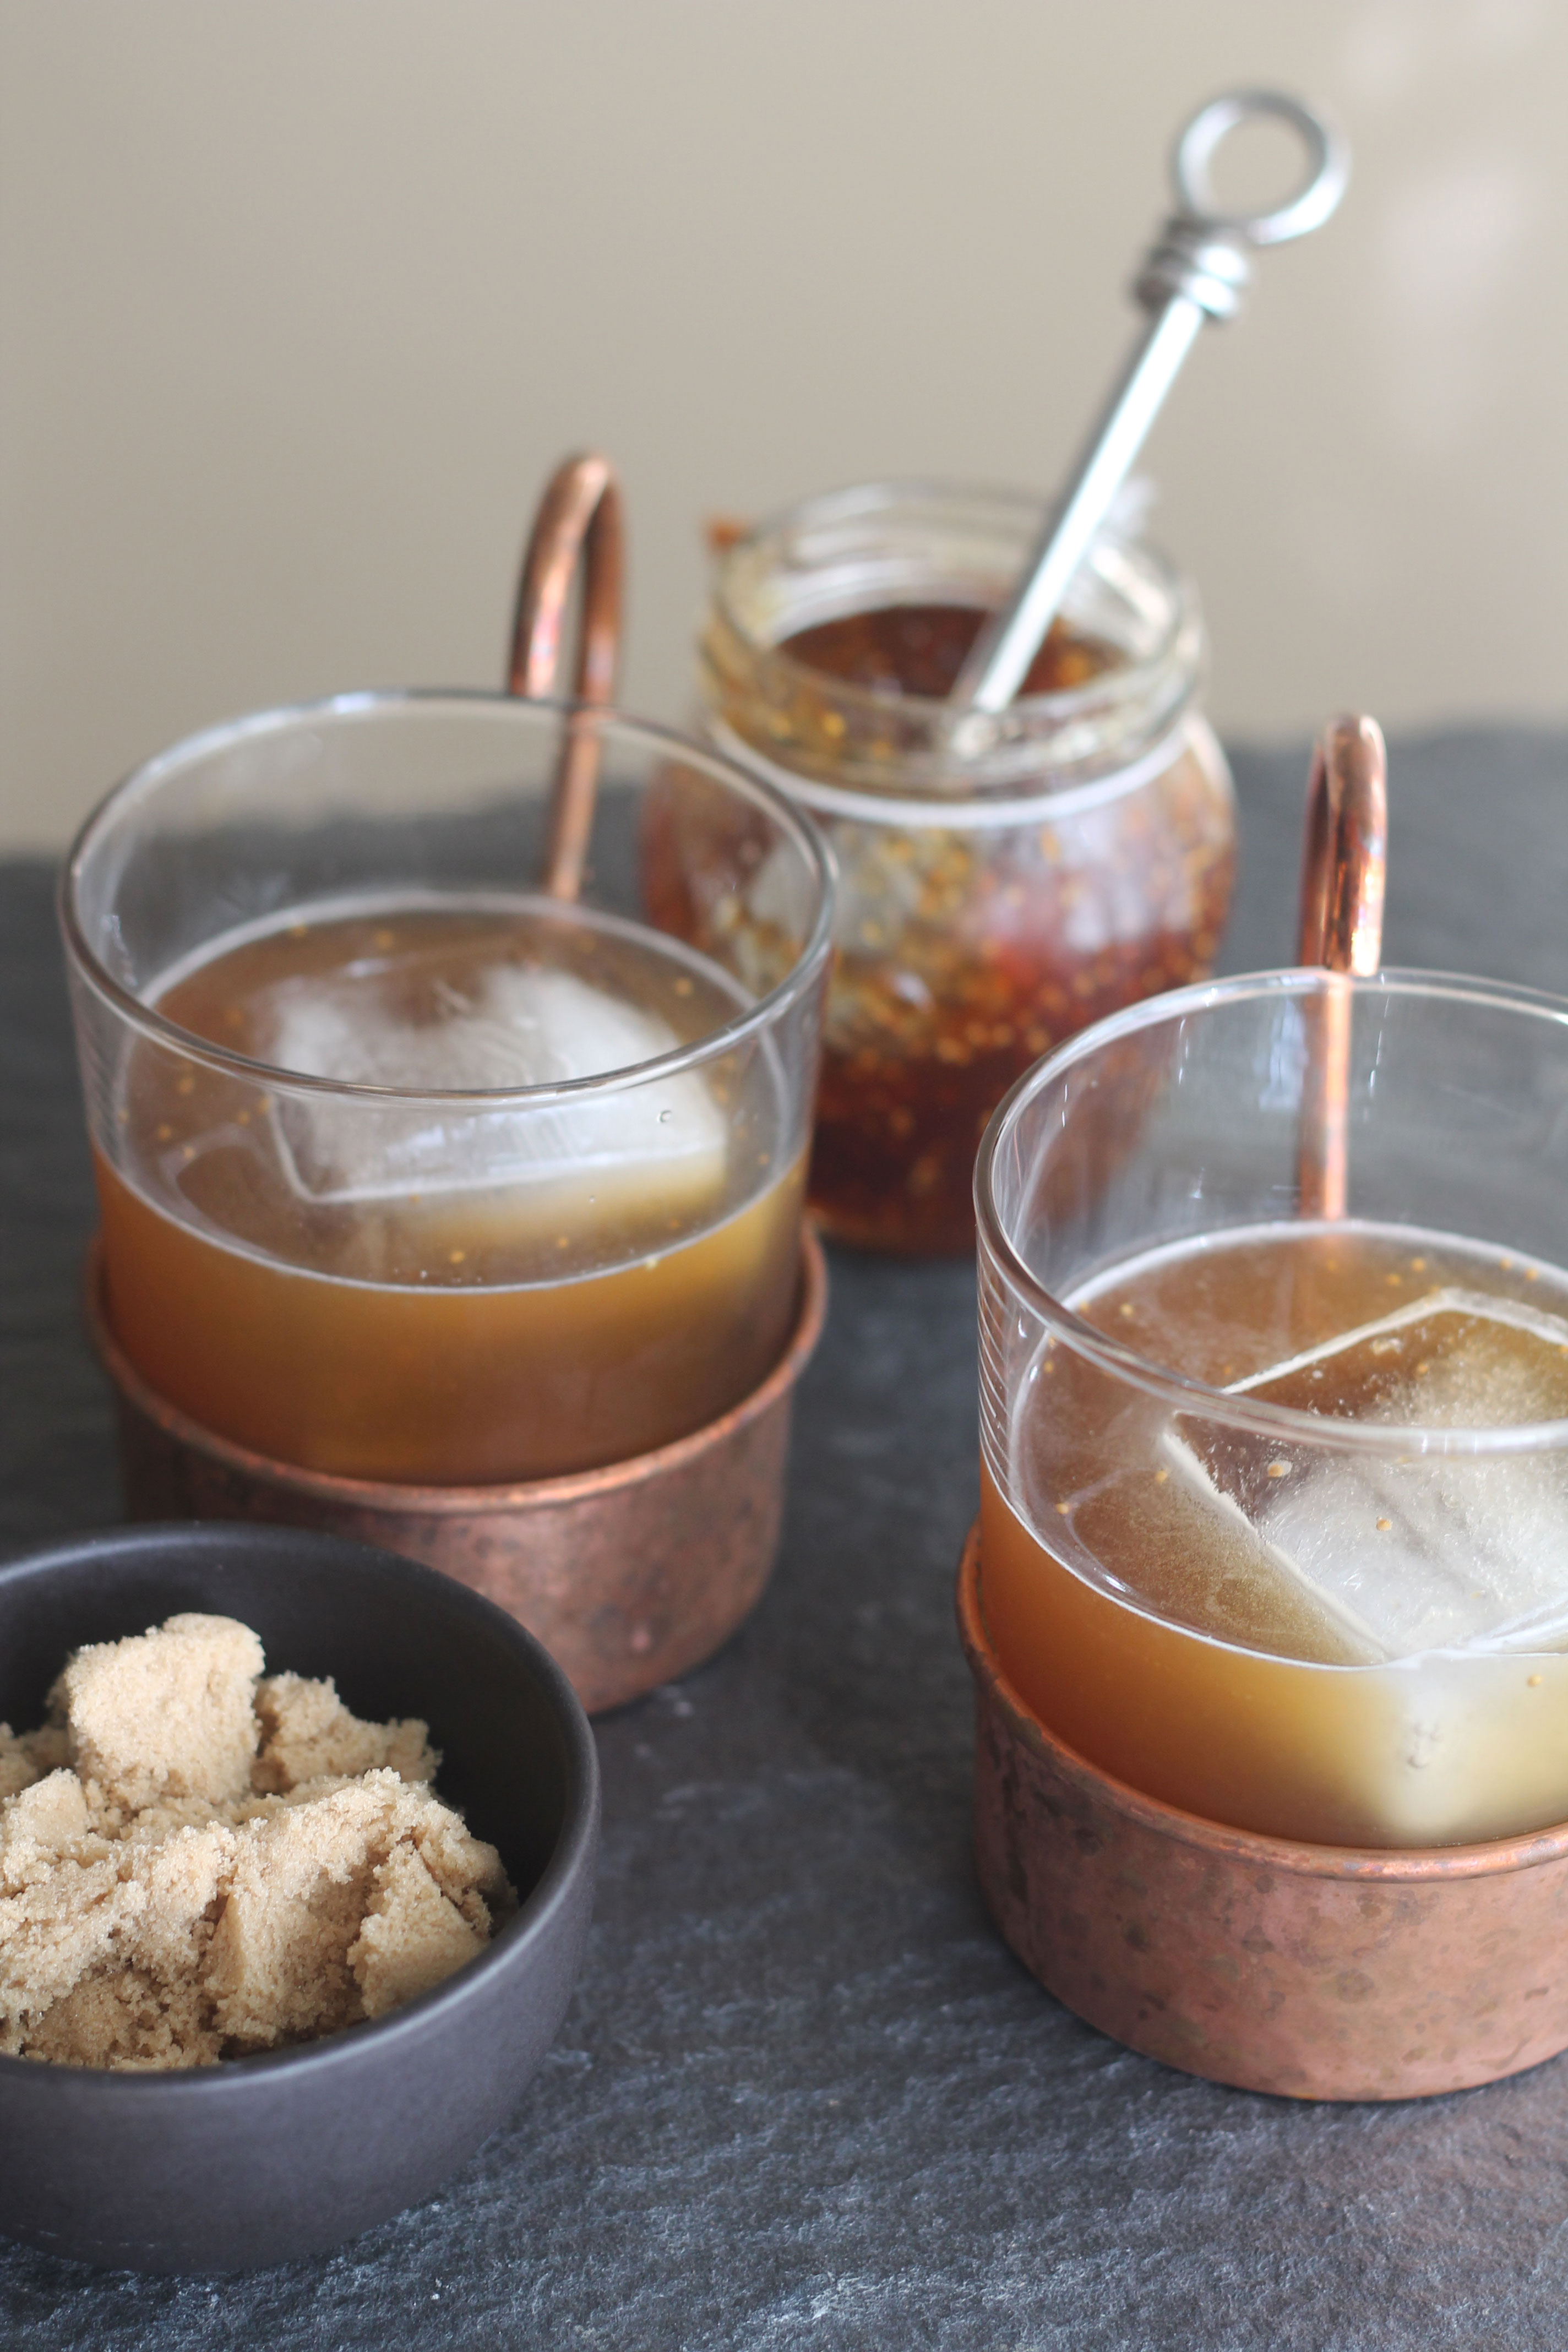 Brown Sugar Bourbon Cocktail - bourbon, brown sugar simple syrup and fig preserves - this will be your new favorite drink!